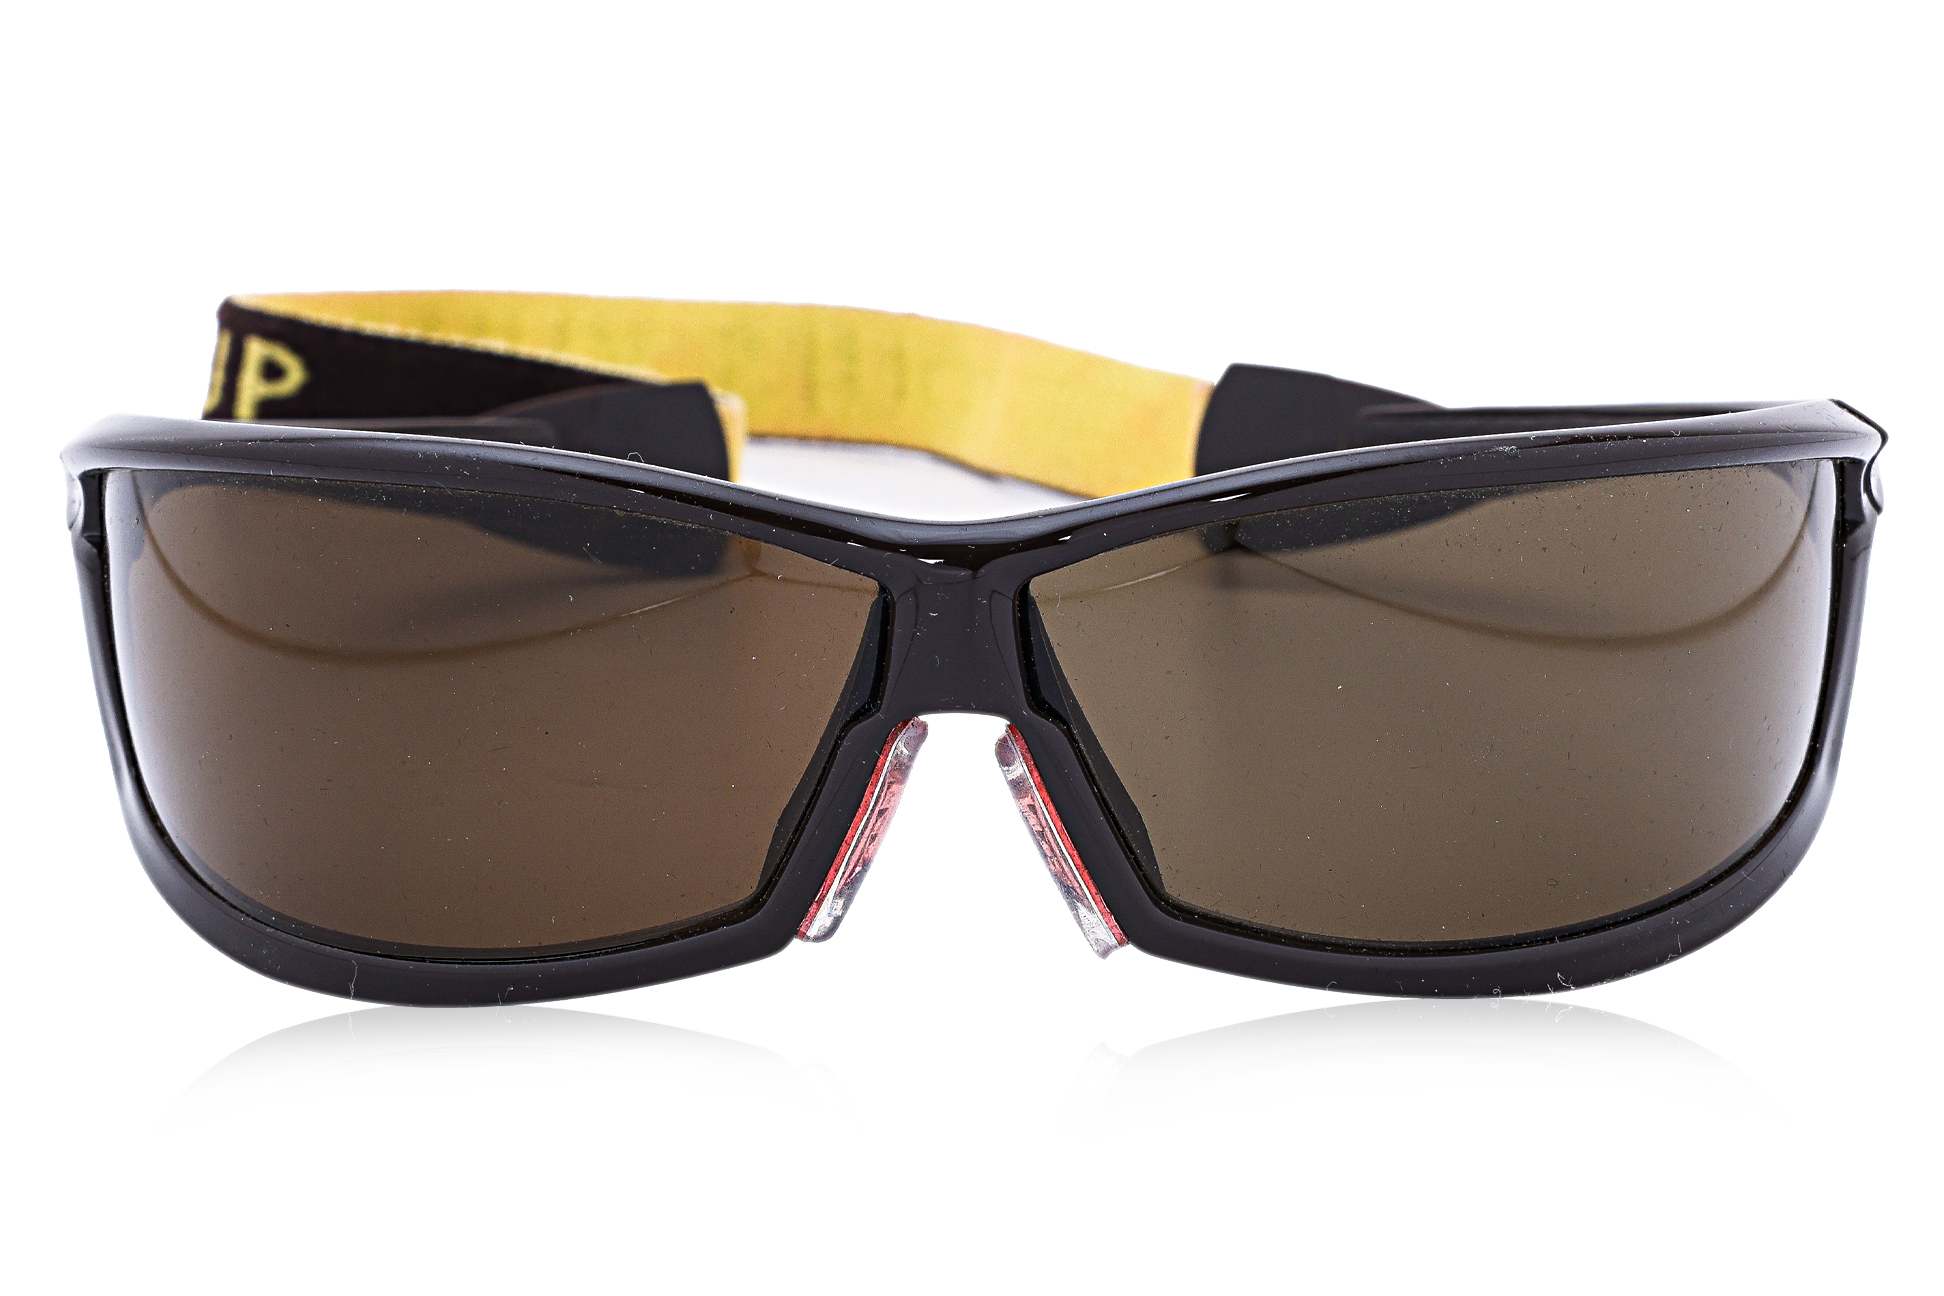 A PAIR OF LOUIS VUITTON CUP SUNGLASSES - Image 2 of 4